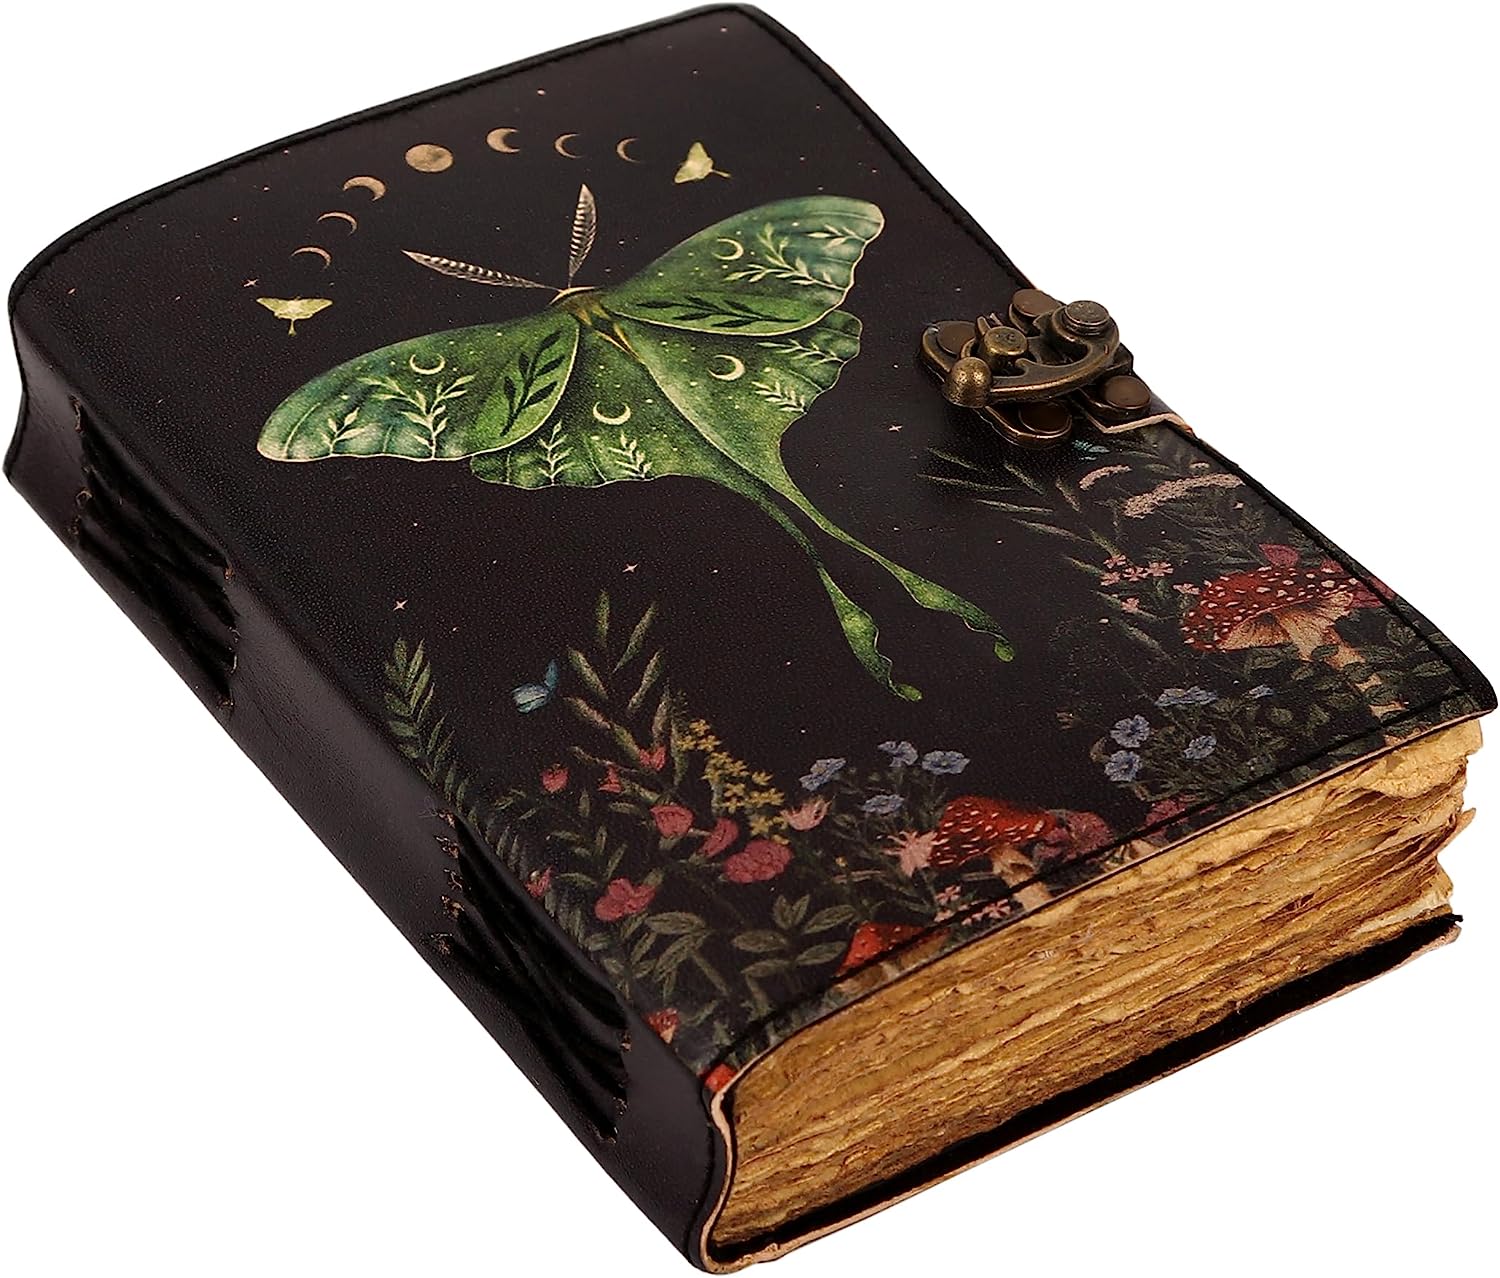 Blank Spell Book of Shadows Journal with Lock Clasp Vintage Handmade  Leather Luna Moths and Morpho Butterfly Print Diary Prayer Pagan Witchcraft  Supplies Wiccan Decor Notebook Daily (8X6 inch) 